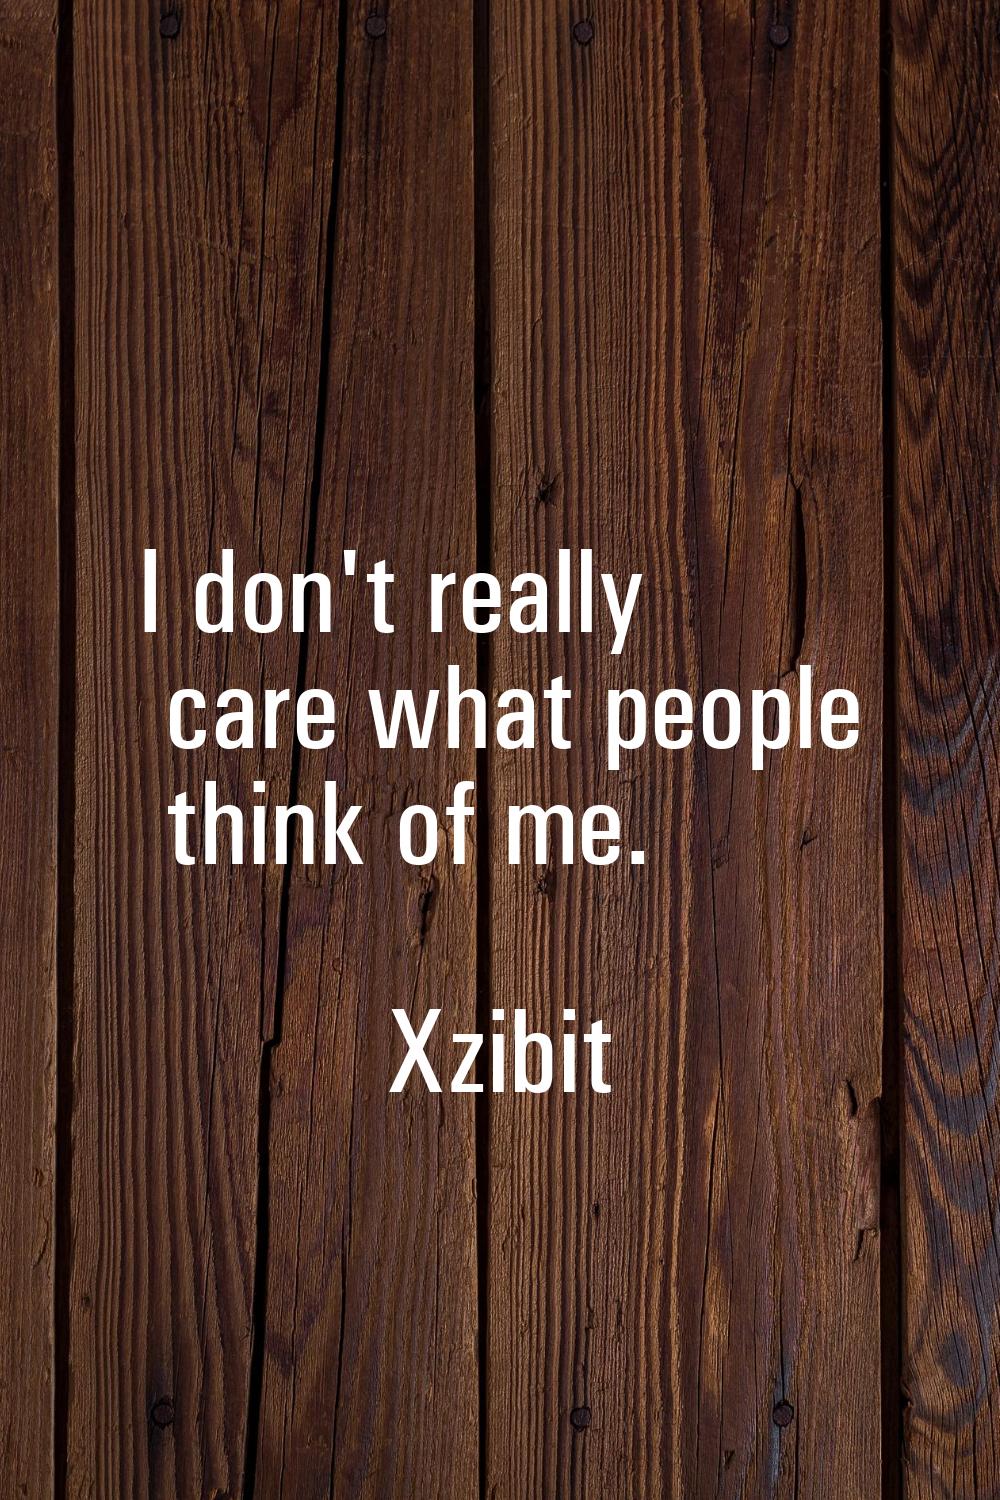 I don't really care what people think of me.